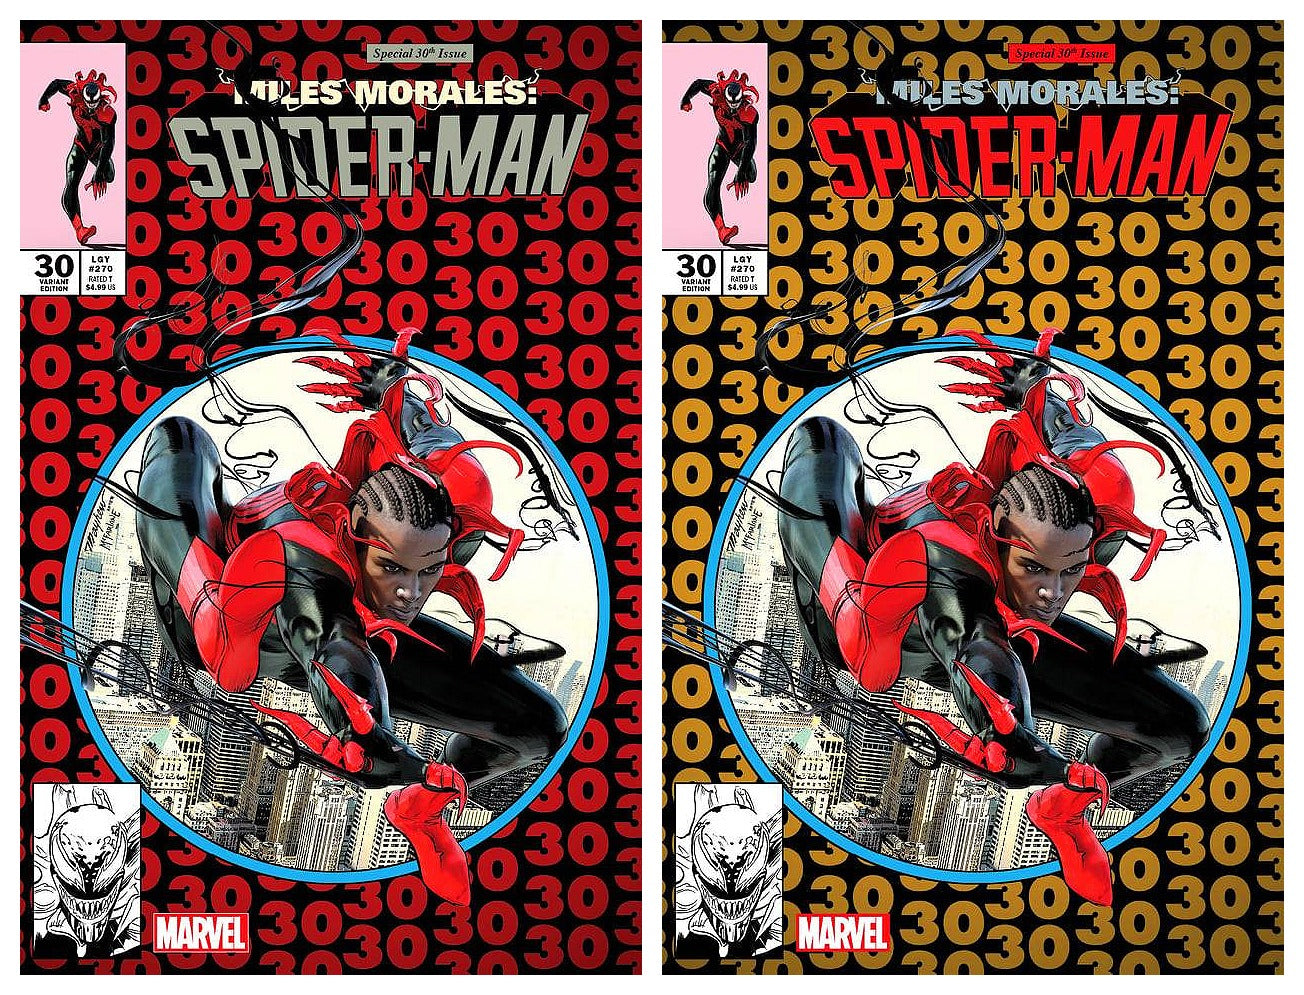 MILES MORALES SPIDER-MAN #30 MIKE MAYHEW TRADE/VIRGIN VARIANT LIMITED TO 1000 SETS